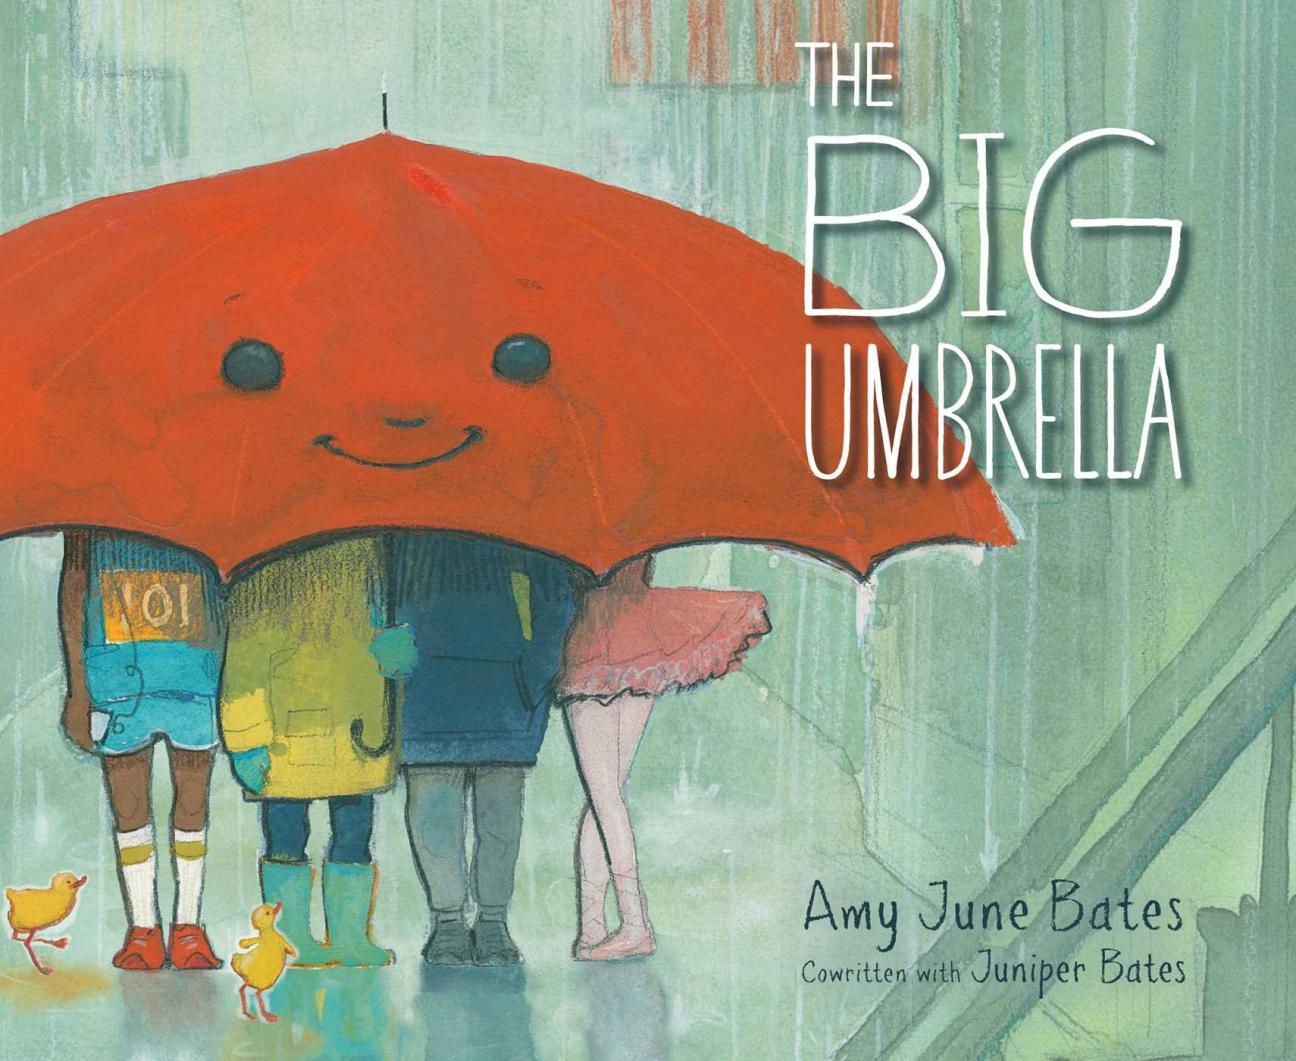 The cover of "The Big Umbrella" by Amy June Bates